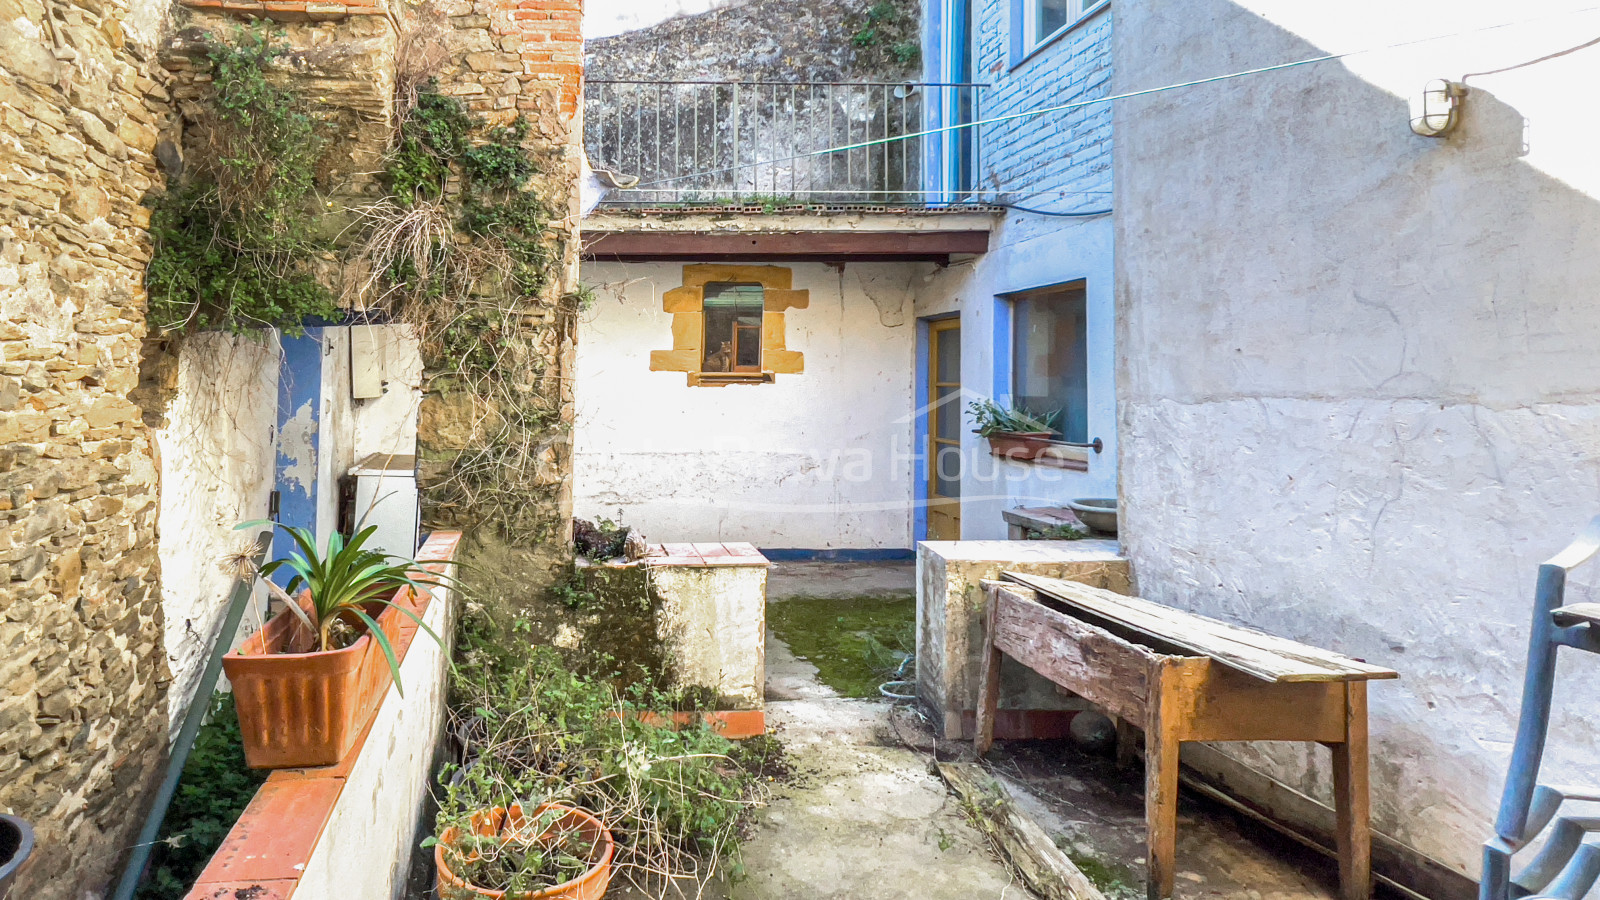 Stone house for sale in Gualta, with interior courtyard and many possibilities for renovation